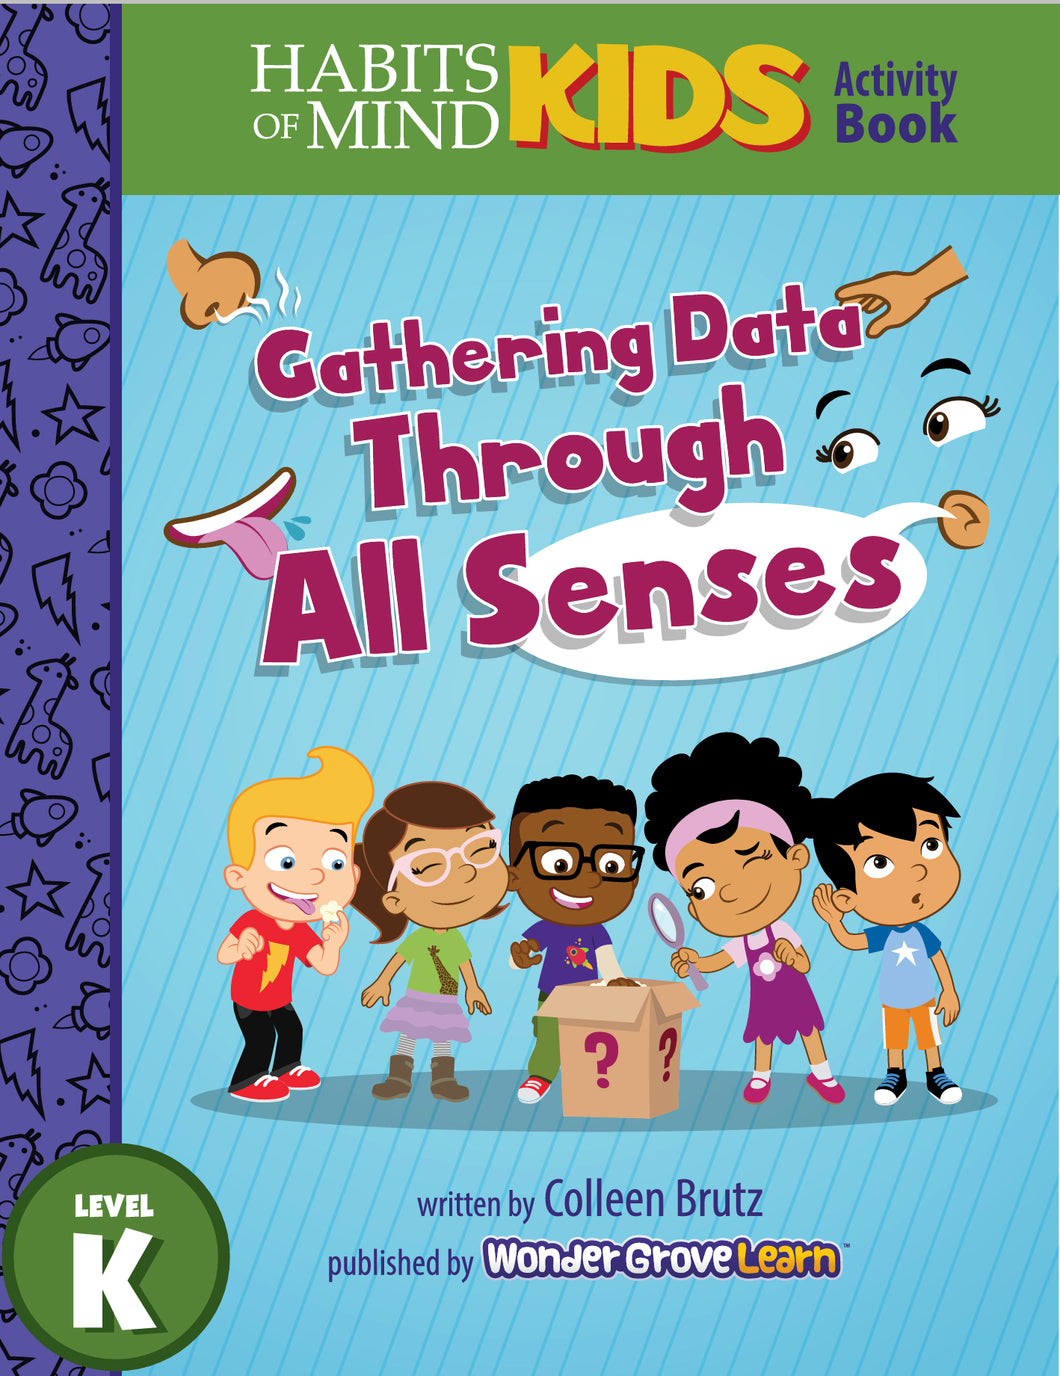 Gathering Data Through All Senses: A Habits of Mind Story for Kindergarten